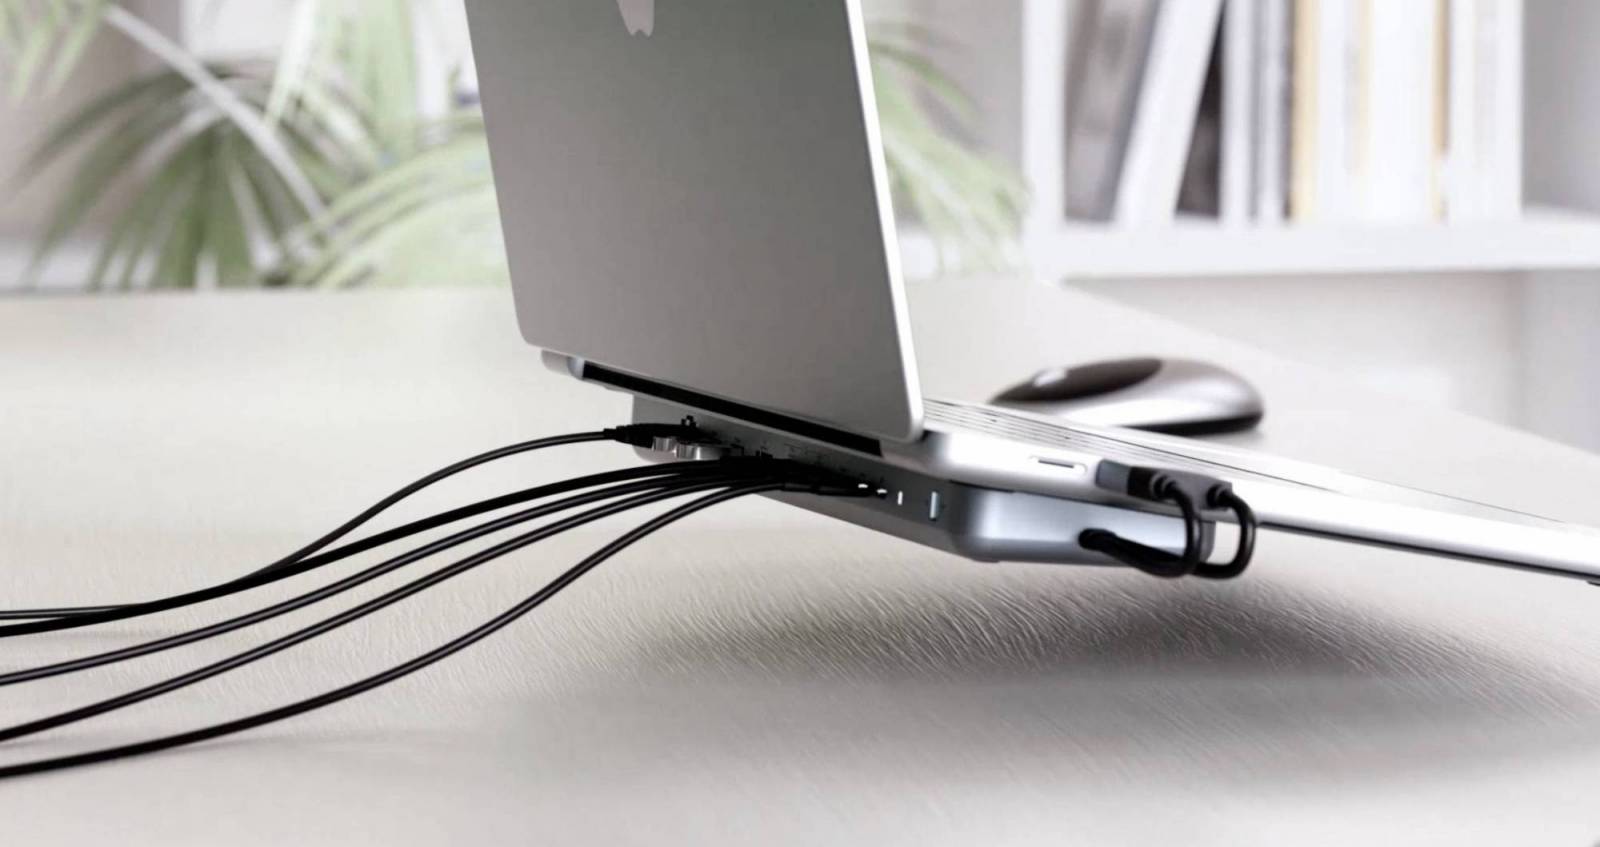 Satechi USB-C Dual Dock Stand Review: The Perfect Way to Add 9 Ports and Additional Storage to Your MacBook